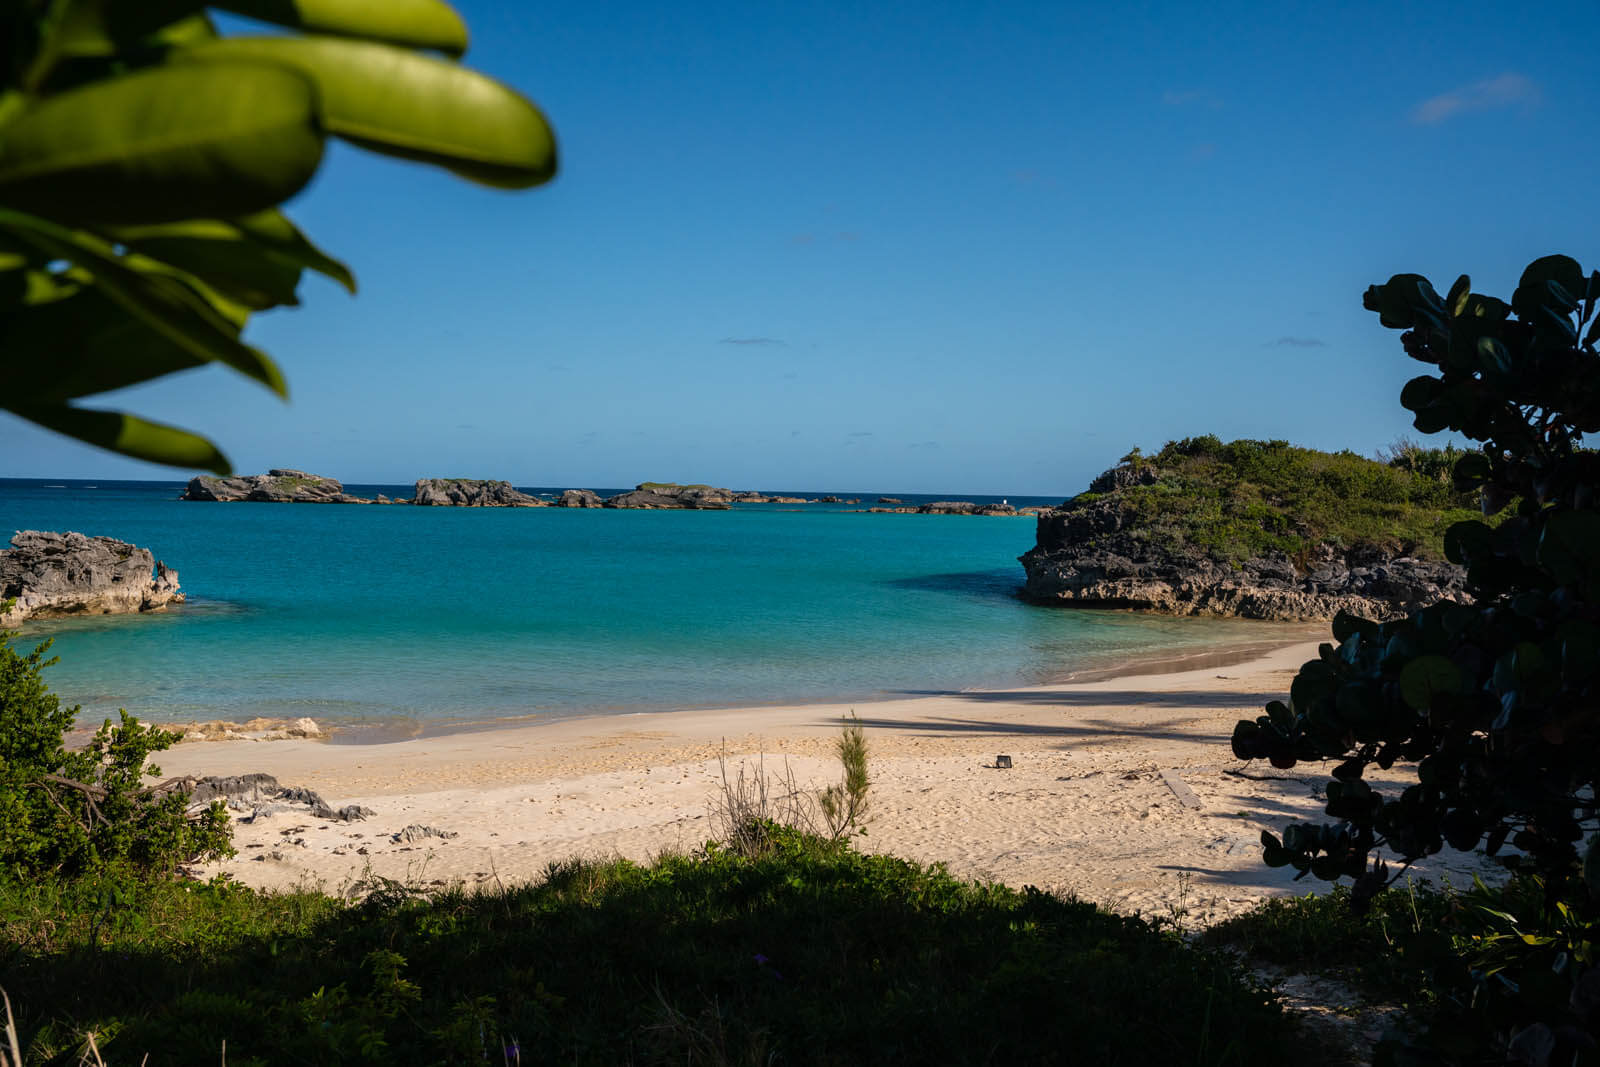 Gorgeous long bay beach at Coopers Island Nature Reserve in Bermuda